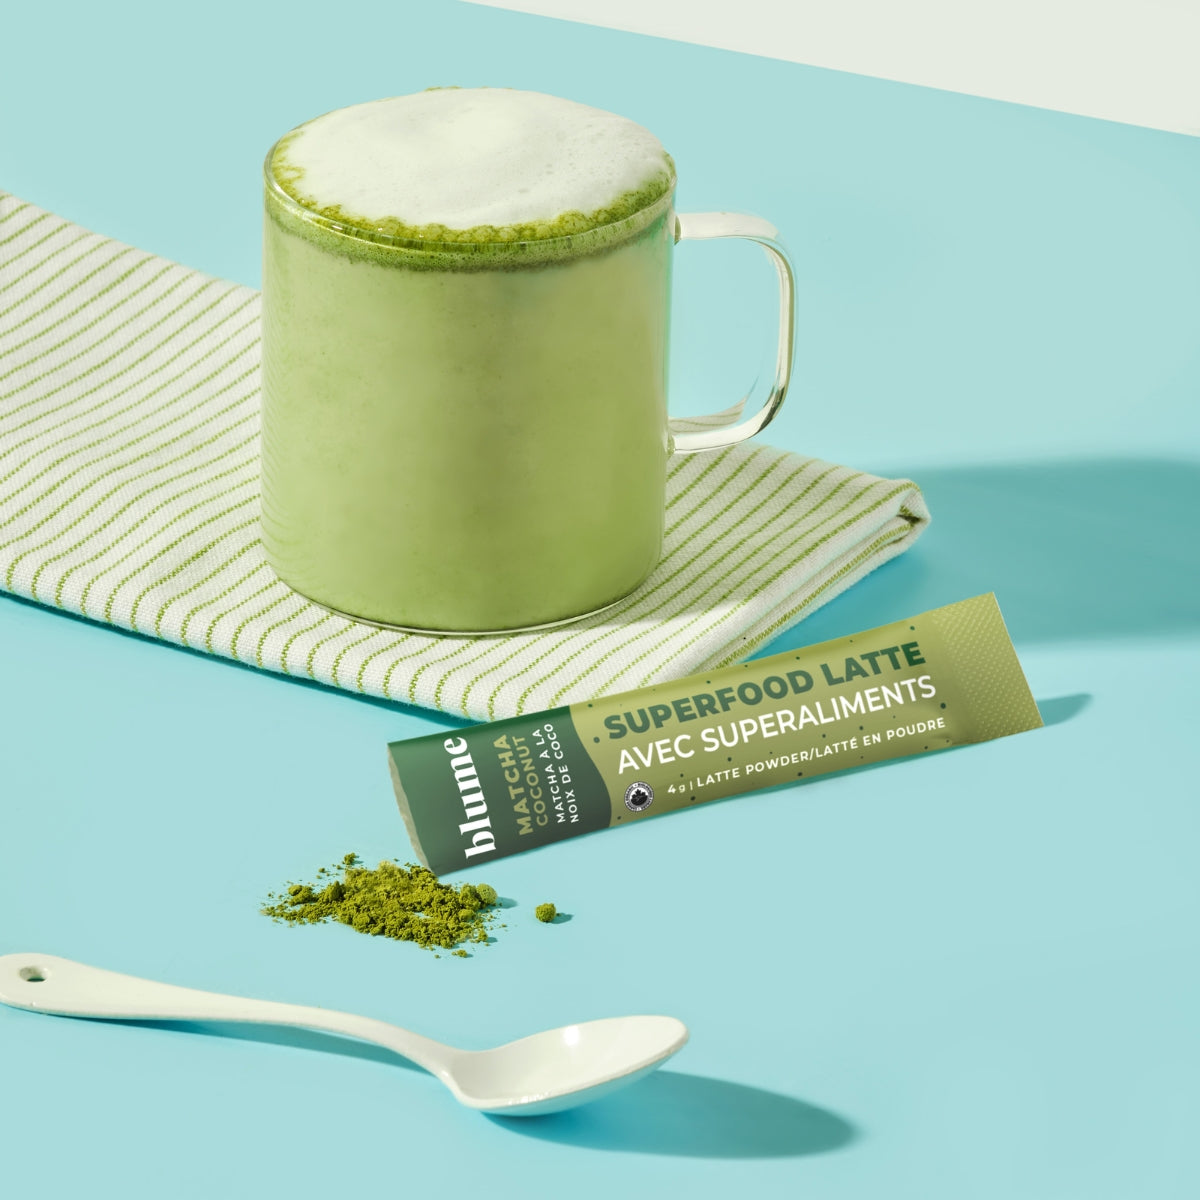 Blume Superfood Latte with a Single Serve packet of Matcha Coconut Blend